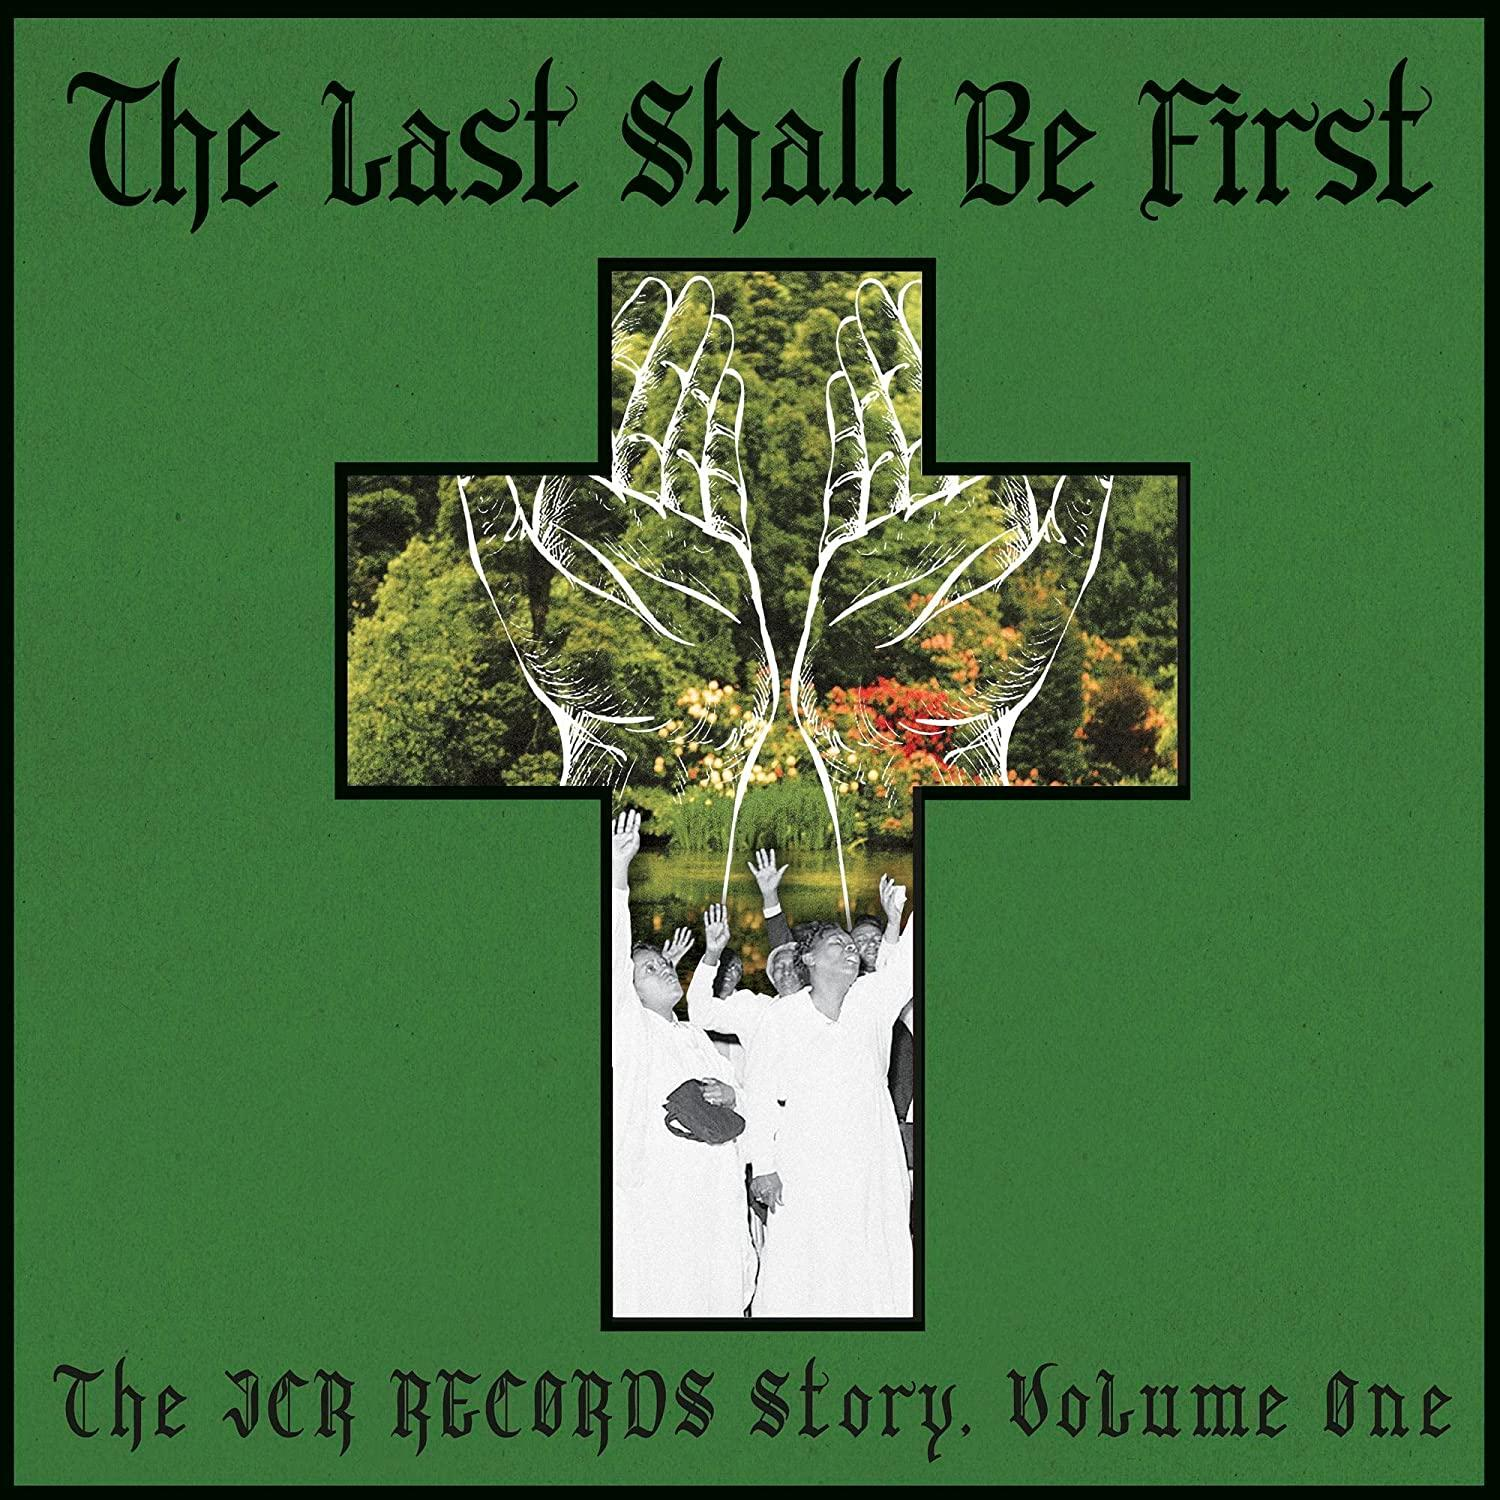 - BE JCR VARIOUS THE SHALL LAST FIRST: STORY RECORDS - (CD)